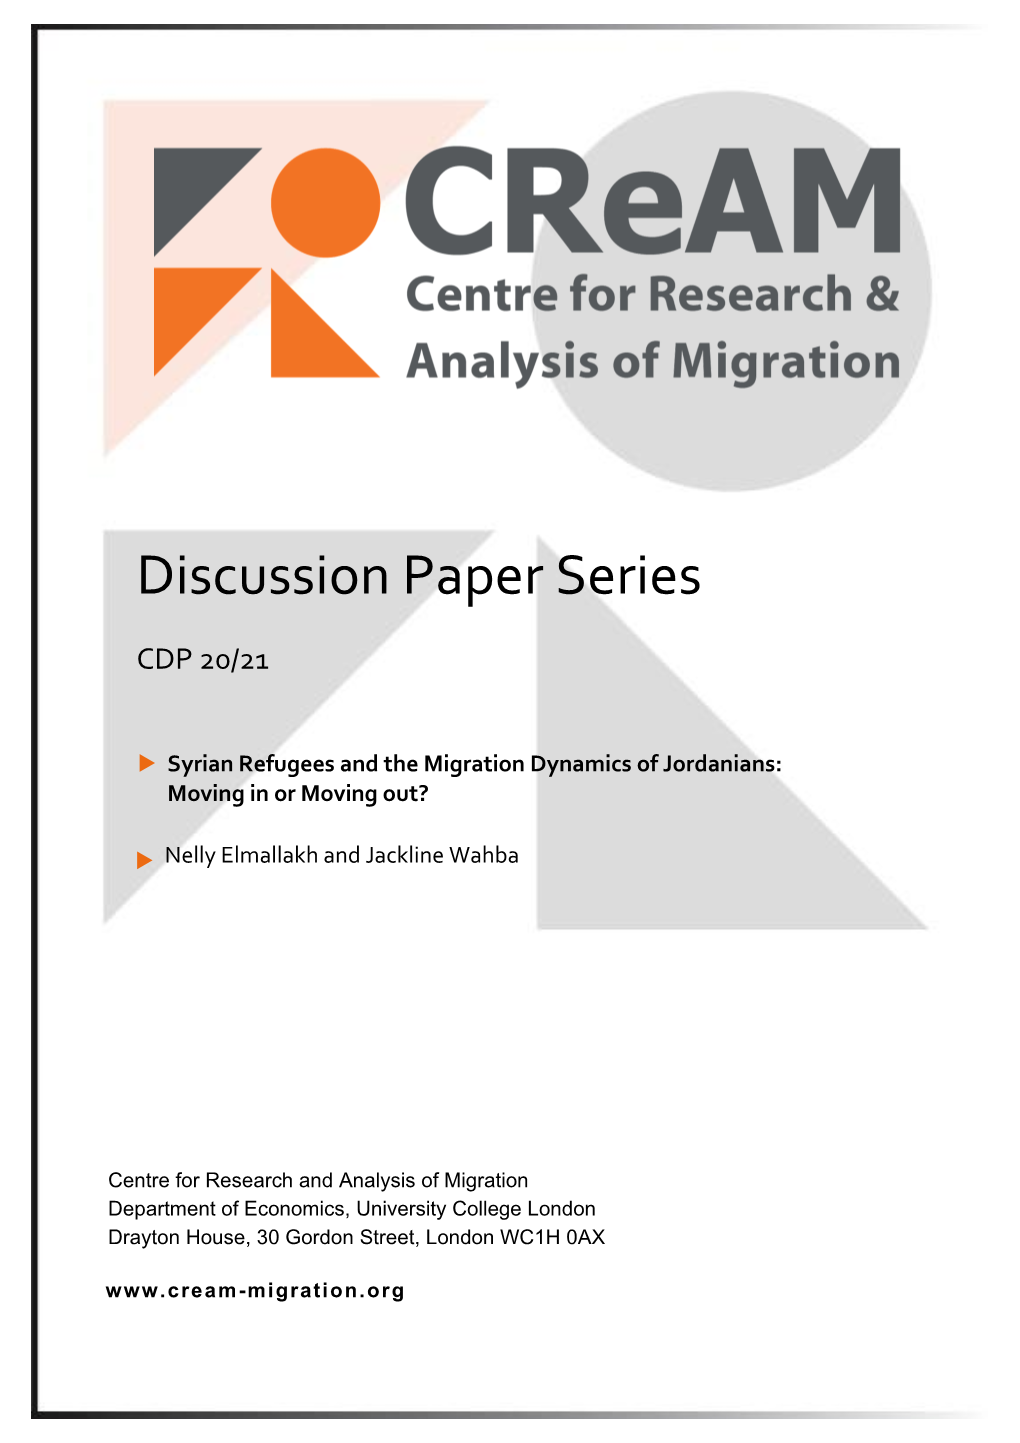 Syrian Refugees and the Migration Dynamics of Jordanians: Moving in Or Moving Out?